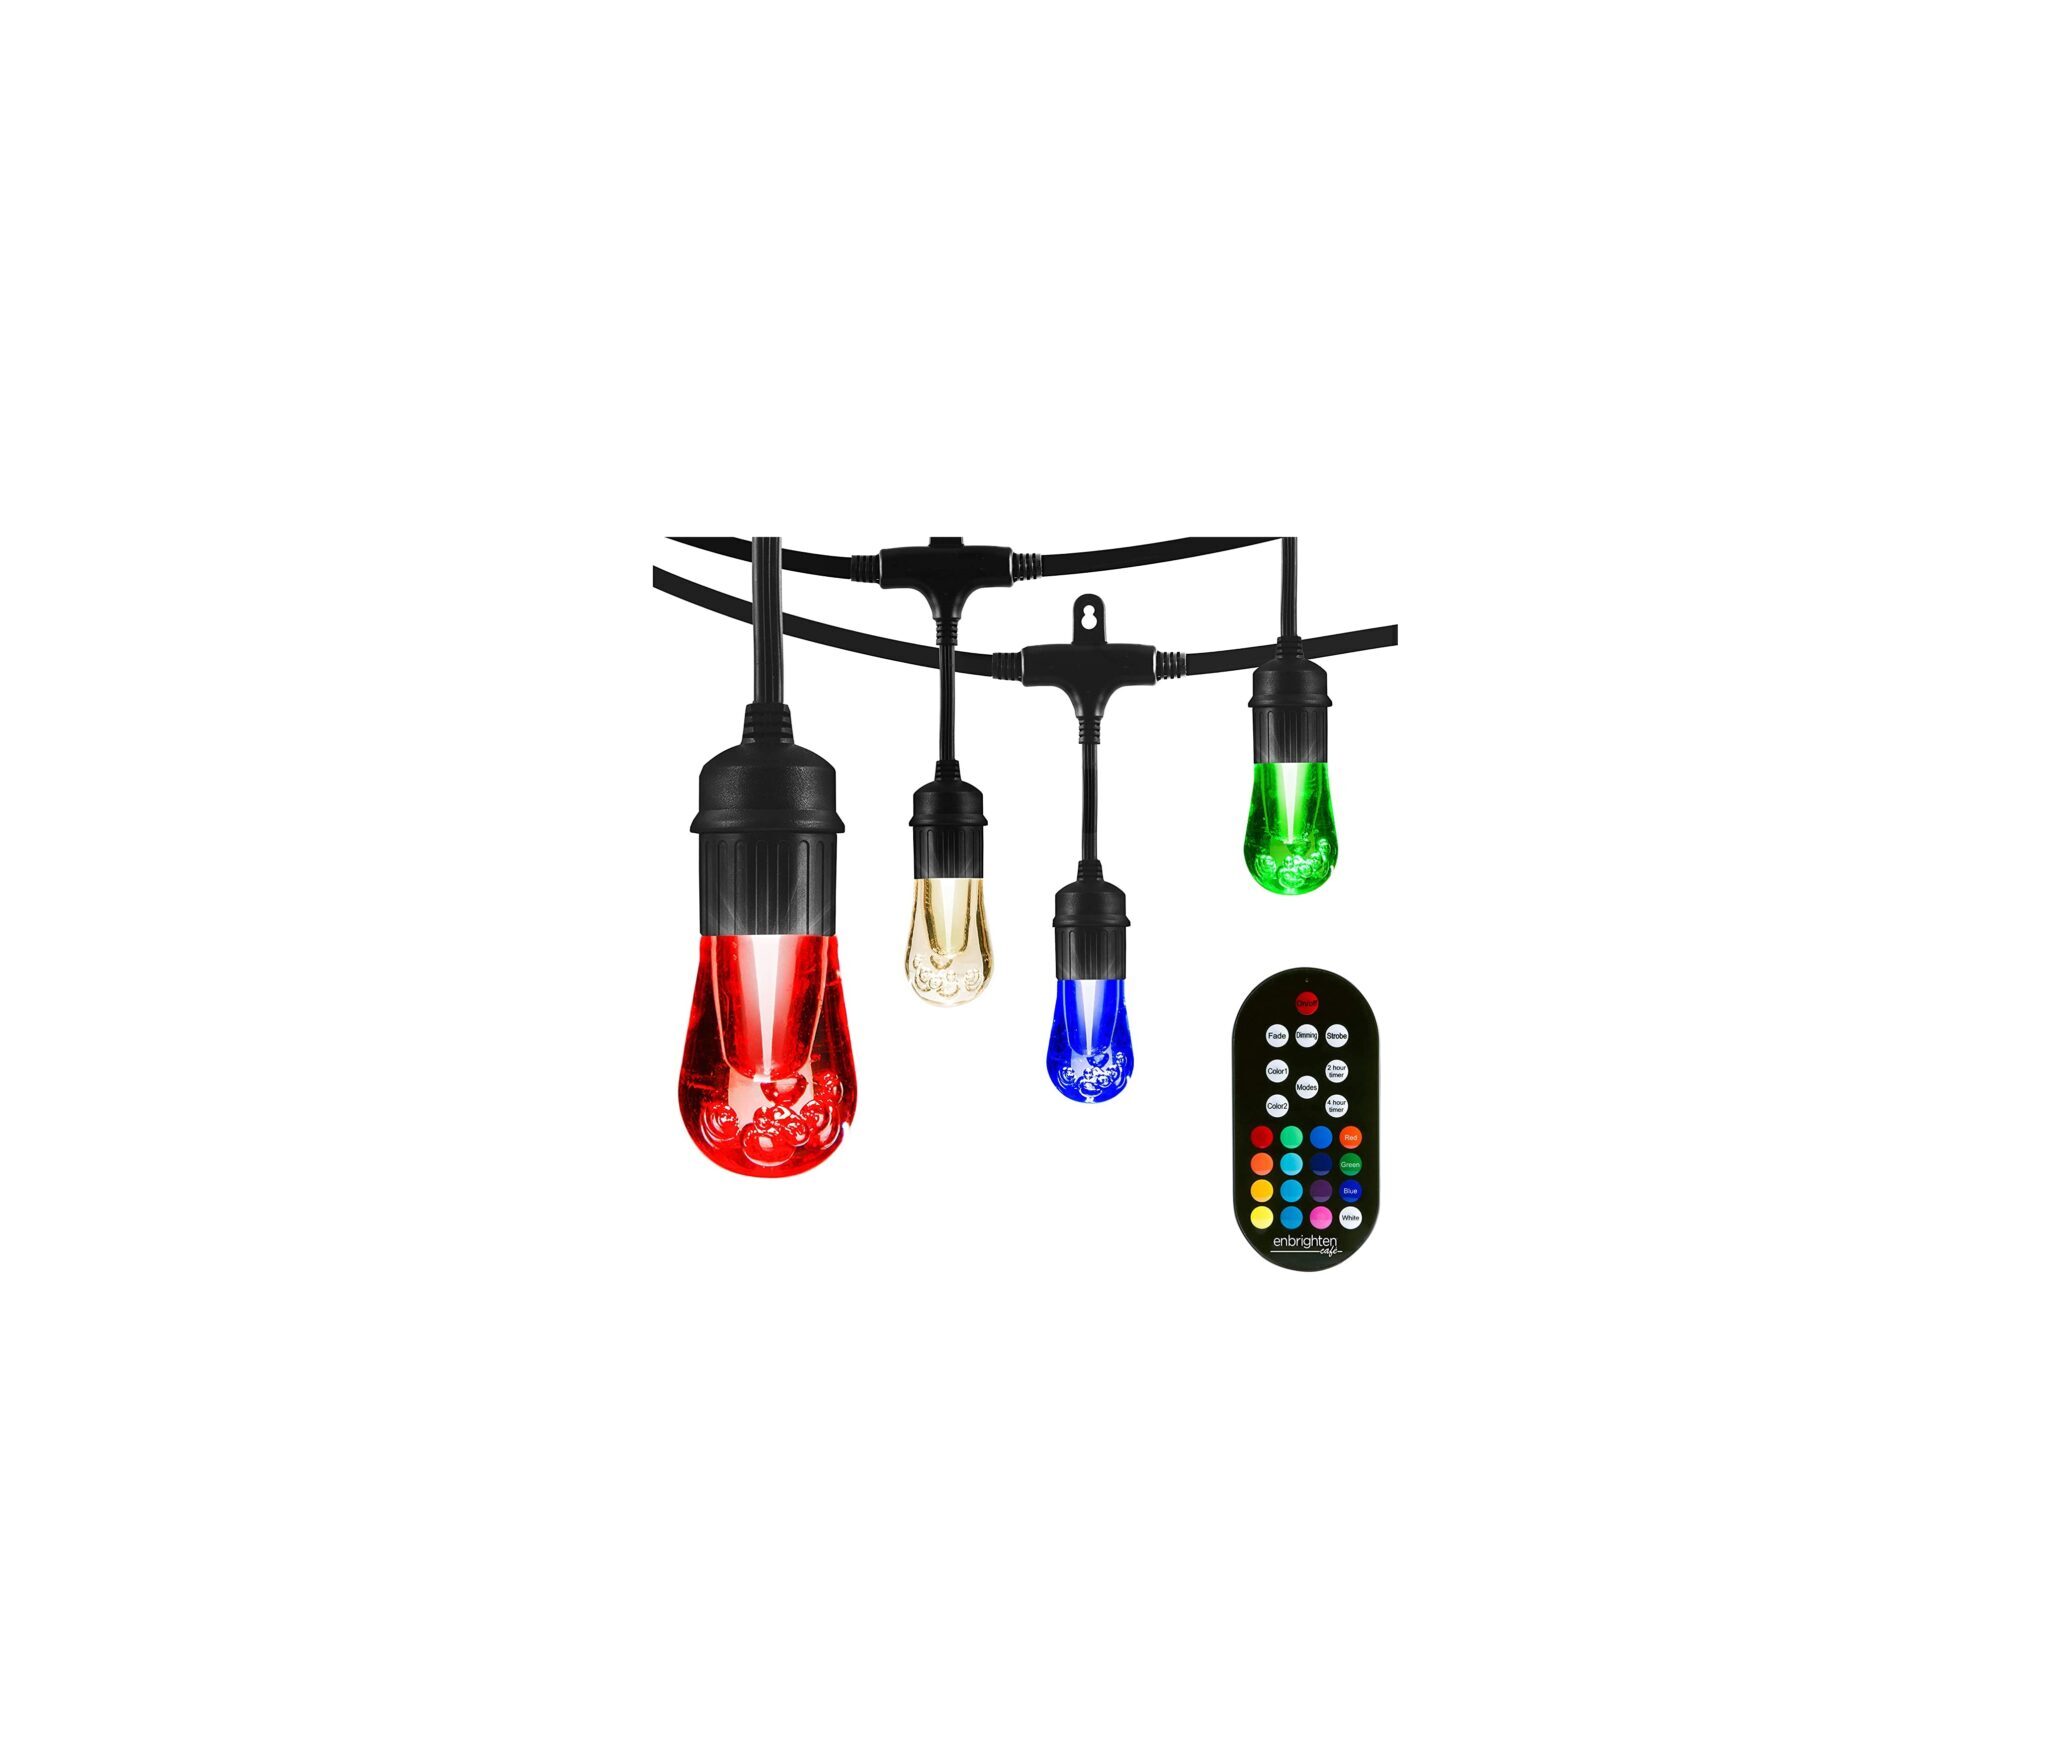 Seasons Color-Changing Classic LED Cafe Lights, 12 Bulbs, 24ft. Black Cord